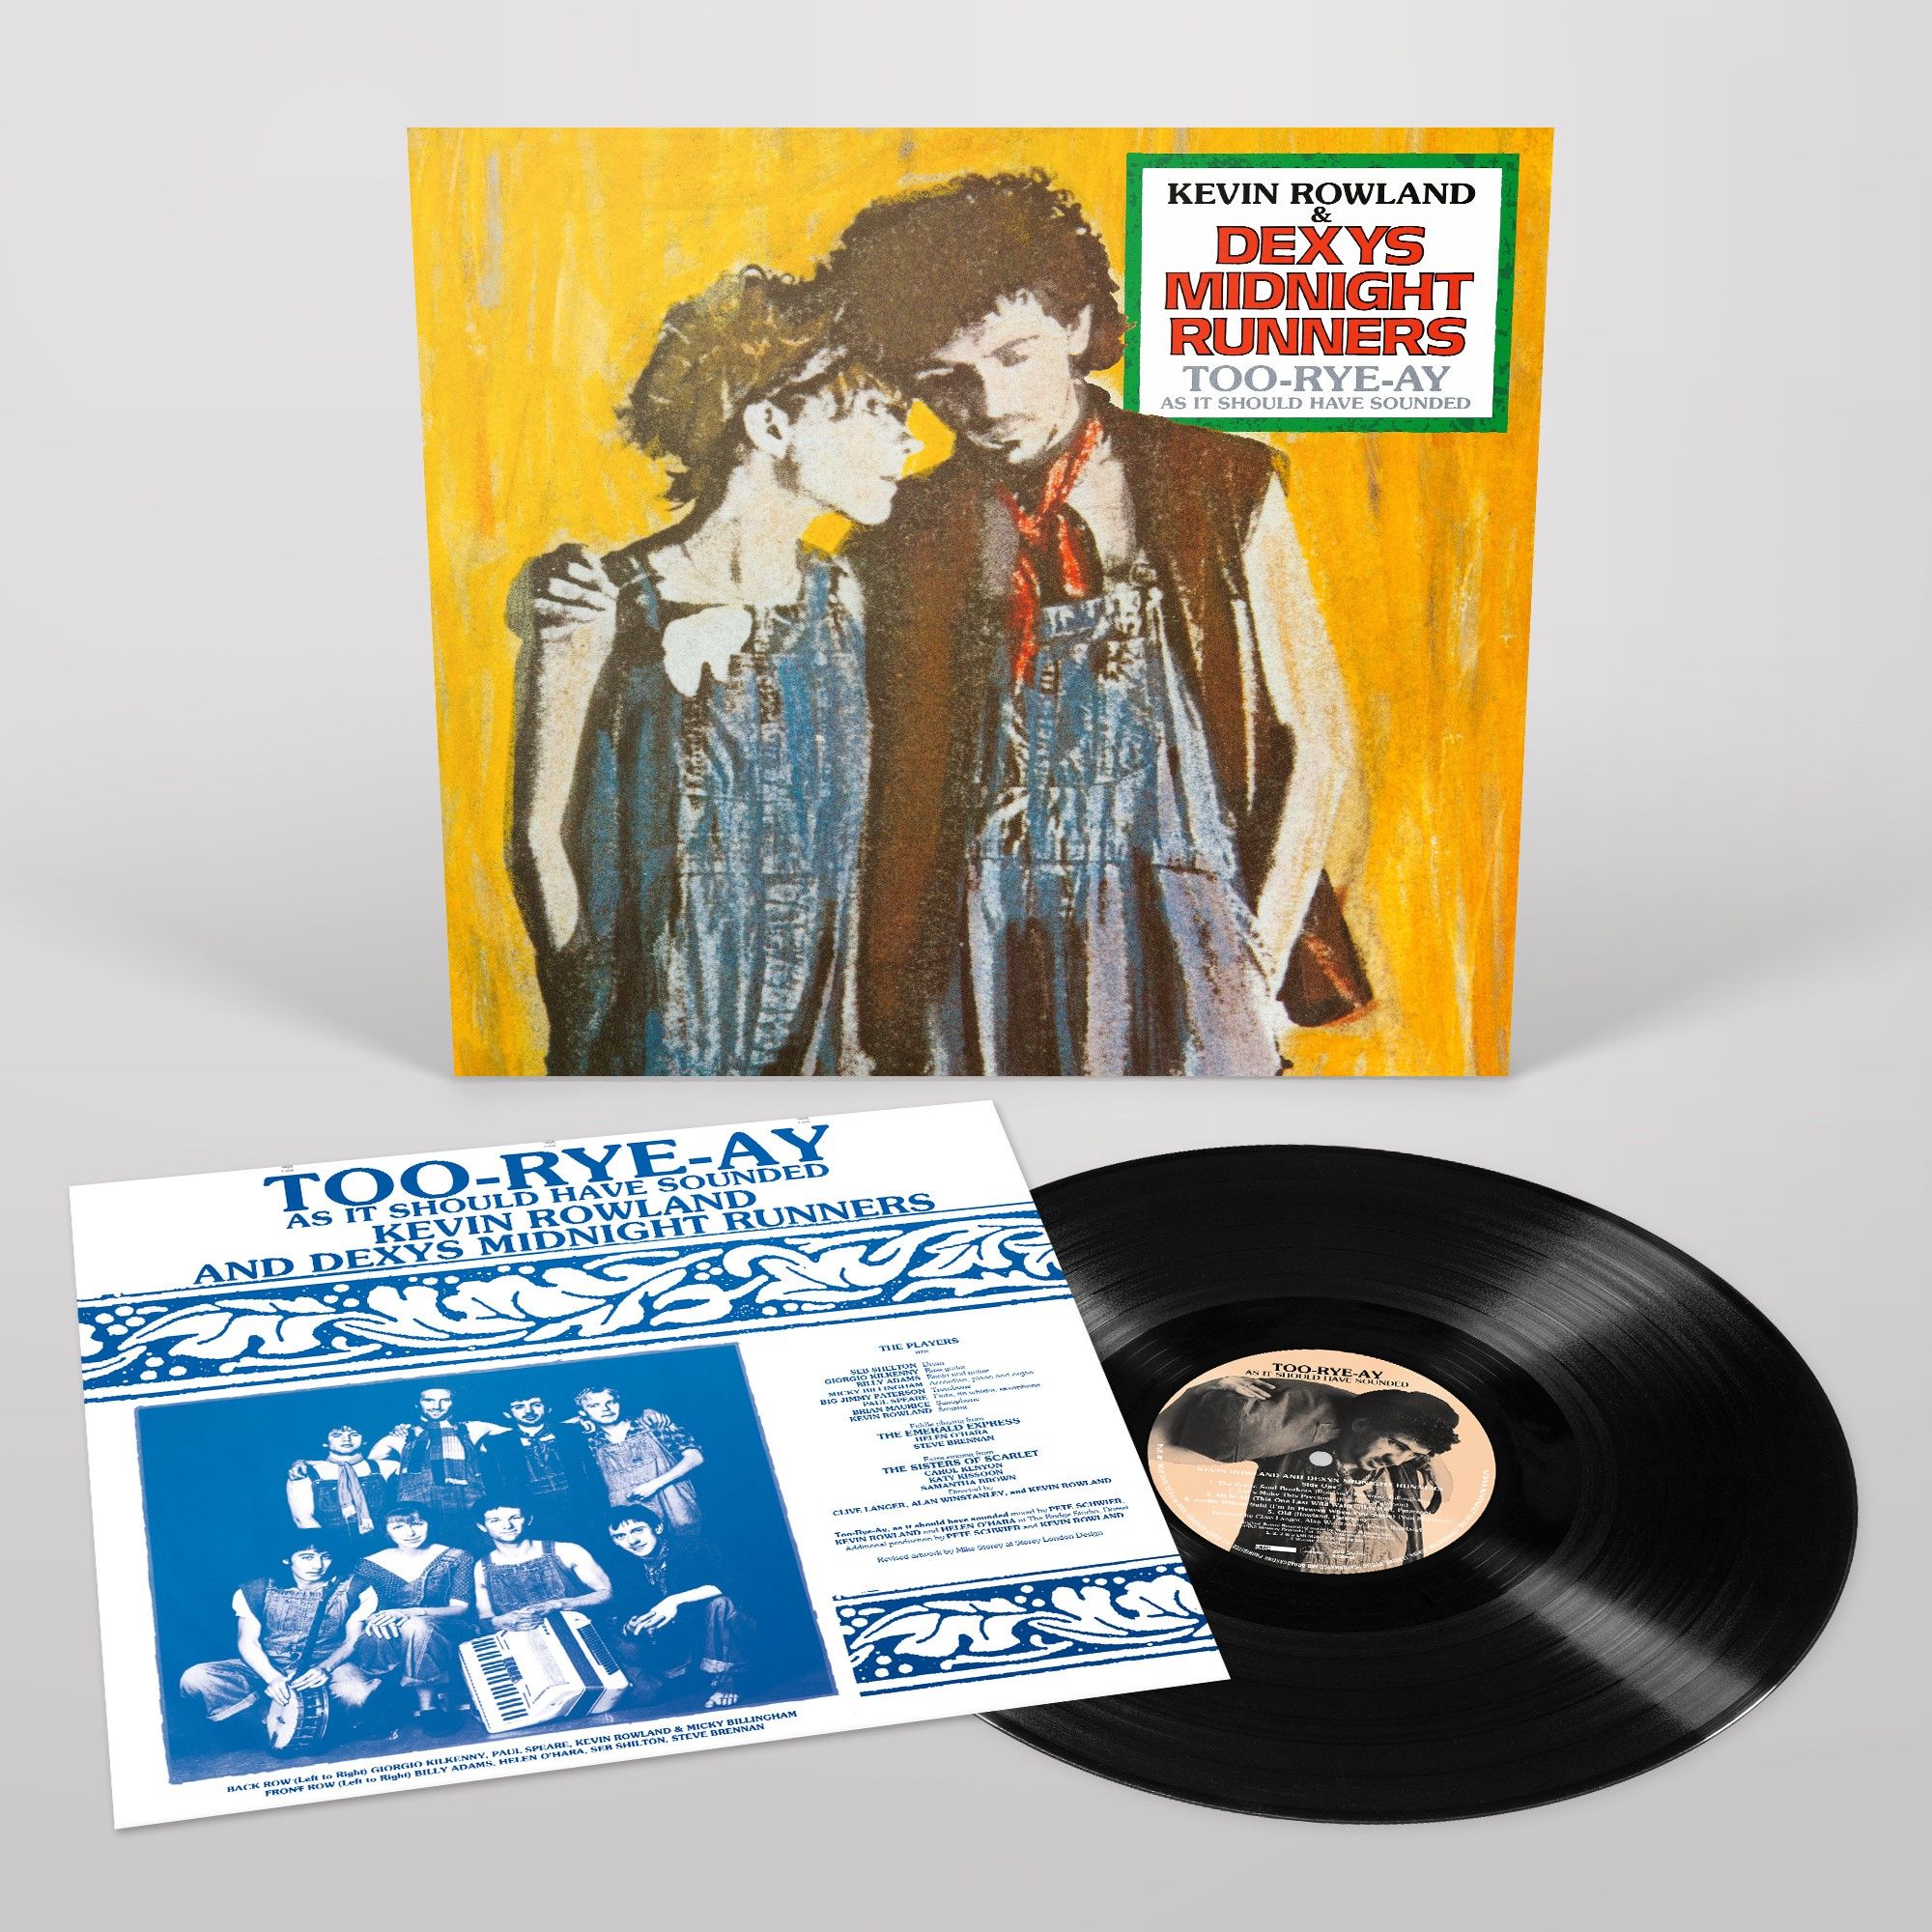 Dexys Midnight Runners, Kevin Rowland - Too-Rye-Ay, As It Should Have Sounded: Vinyl LP